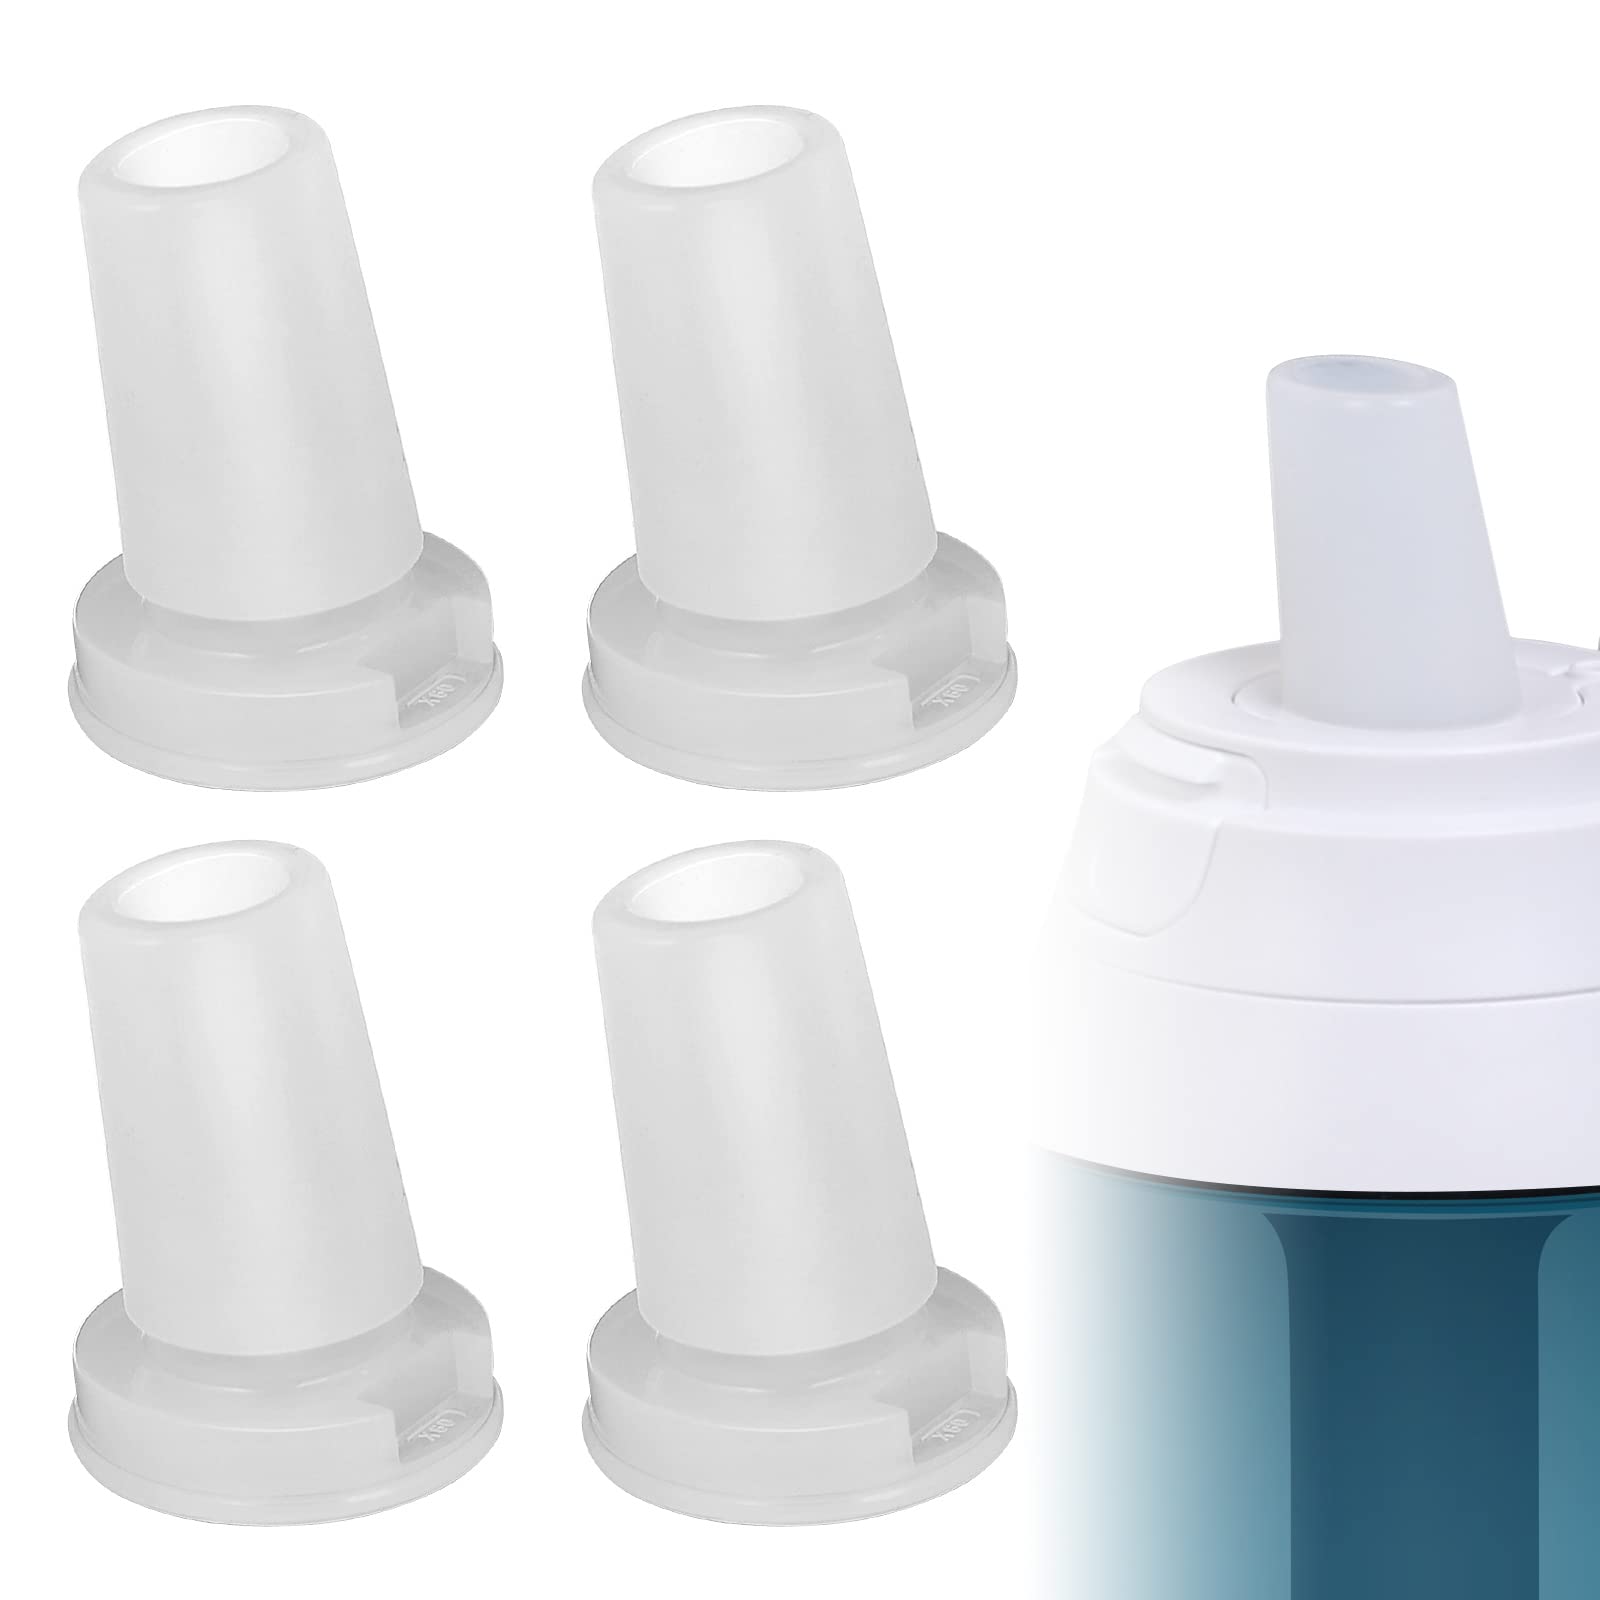 4 Pack Water Bottle Mouthpiece Replacement for Brita Water Bottle, Silicone Water Bottle Bite Valve Replacement Parts Compatible with Brita Filter Water Bottles & Brita Stainless Steel Water Bottle